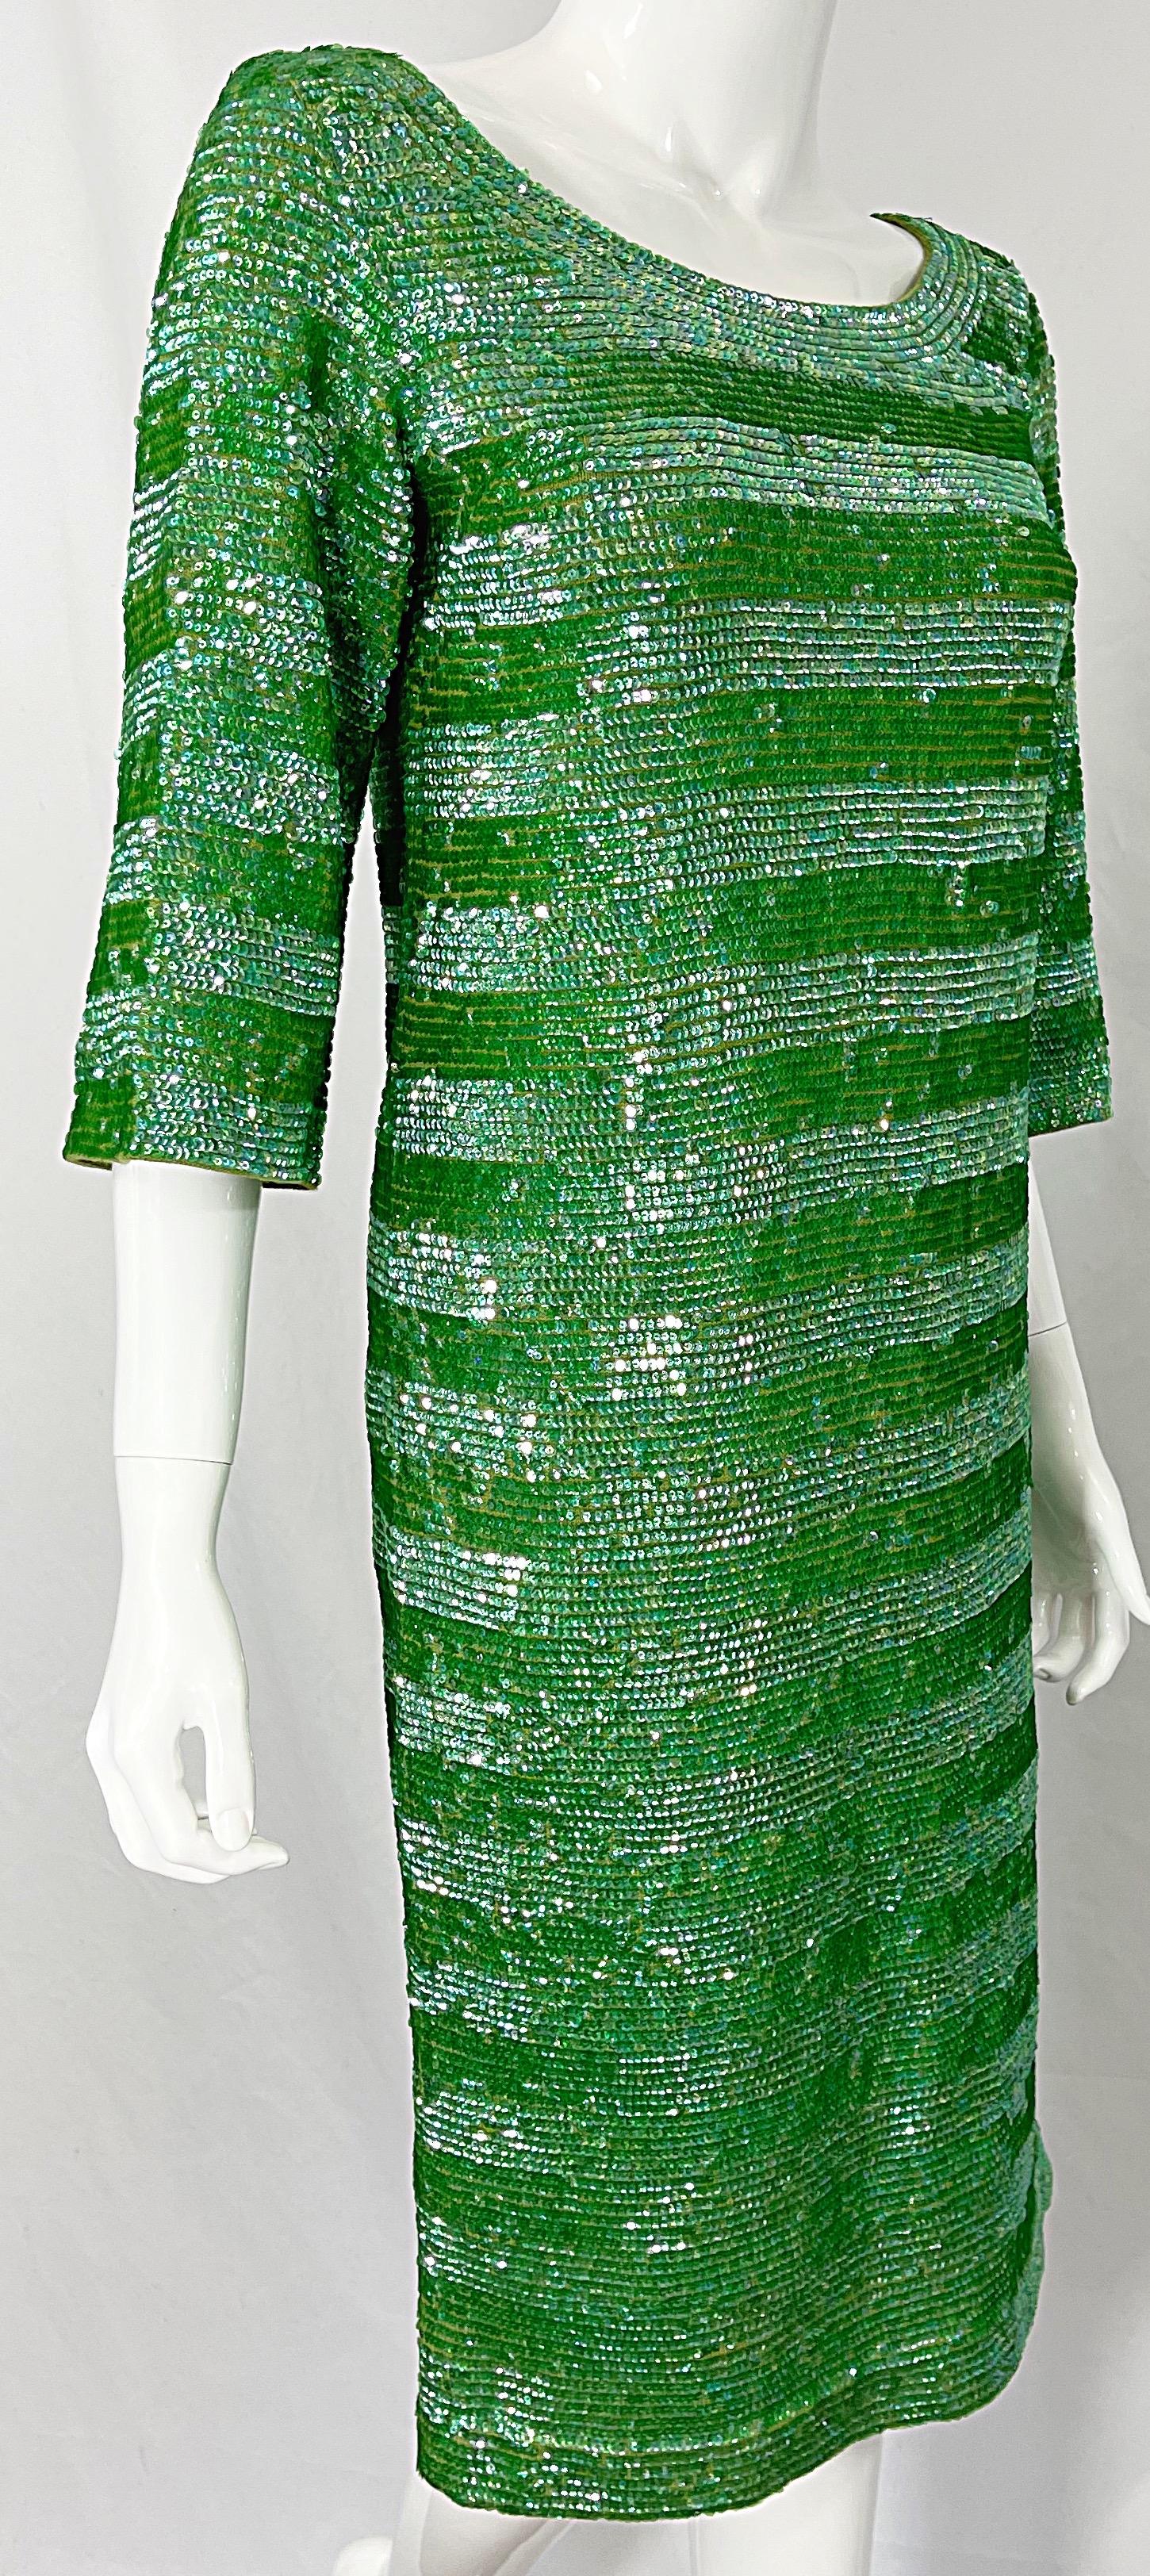 Women's 1960s Lime Green Fully Sequined 3/4 Sleeves Vintage 60s Wool Dress For Sale